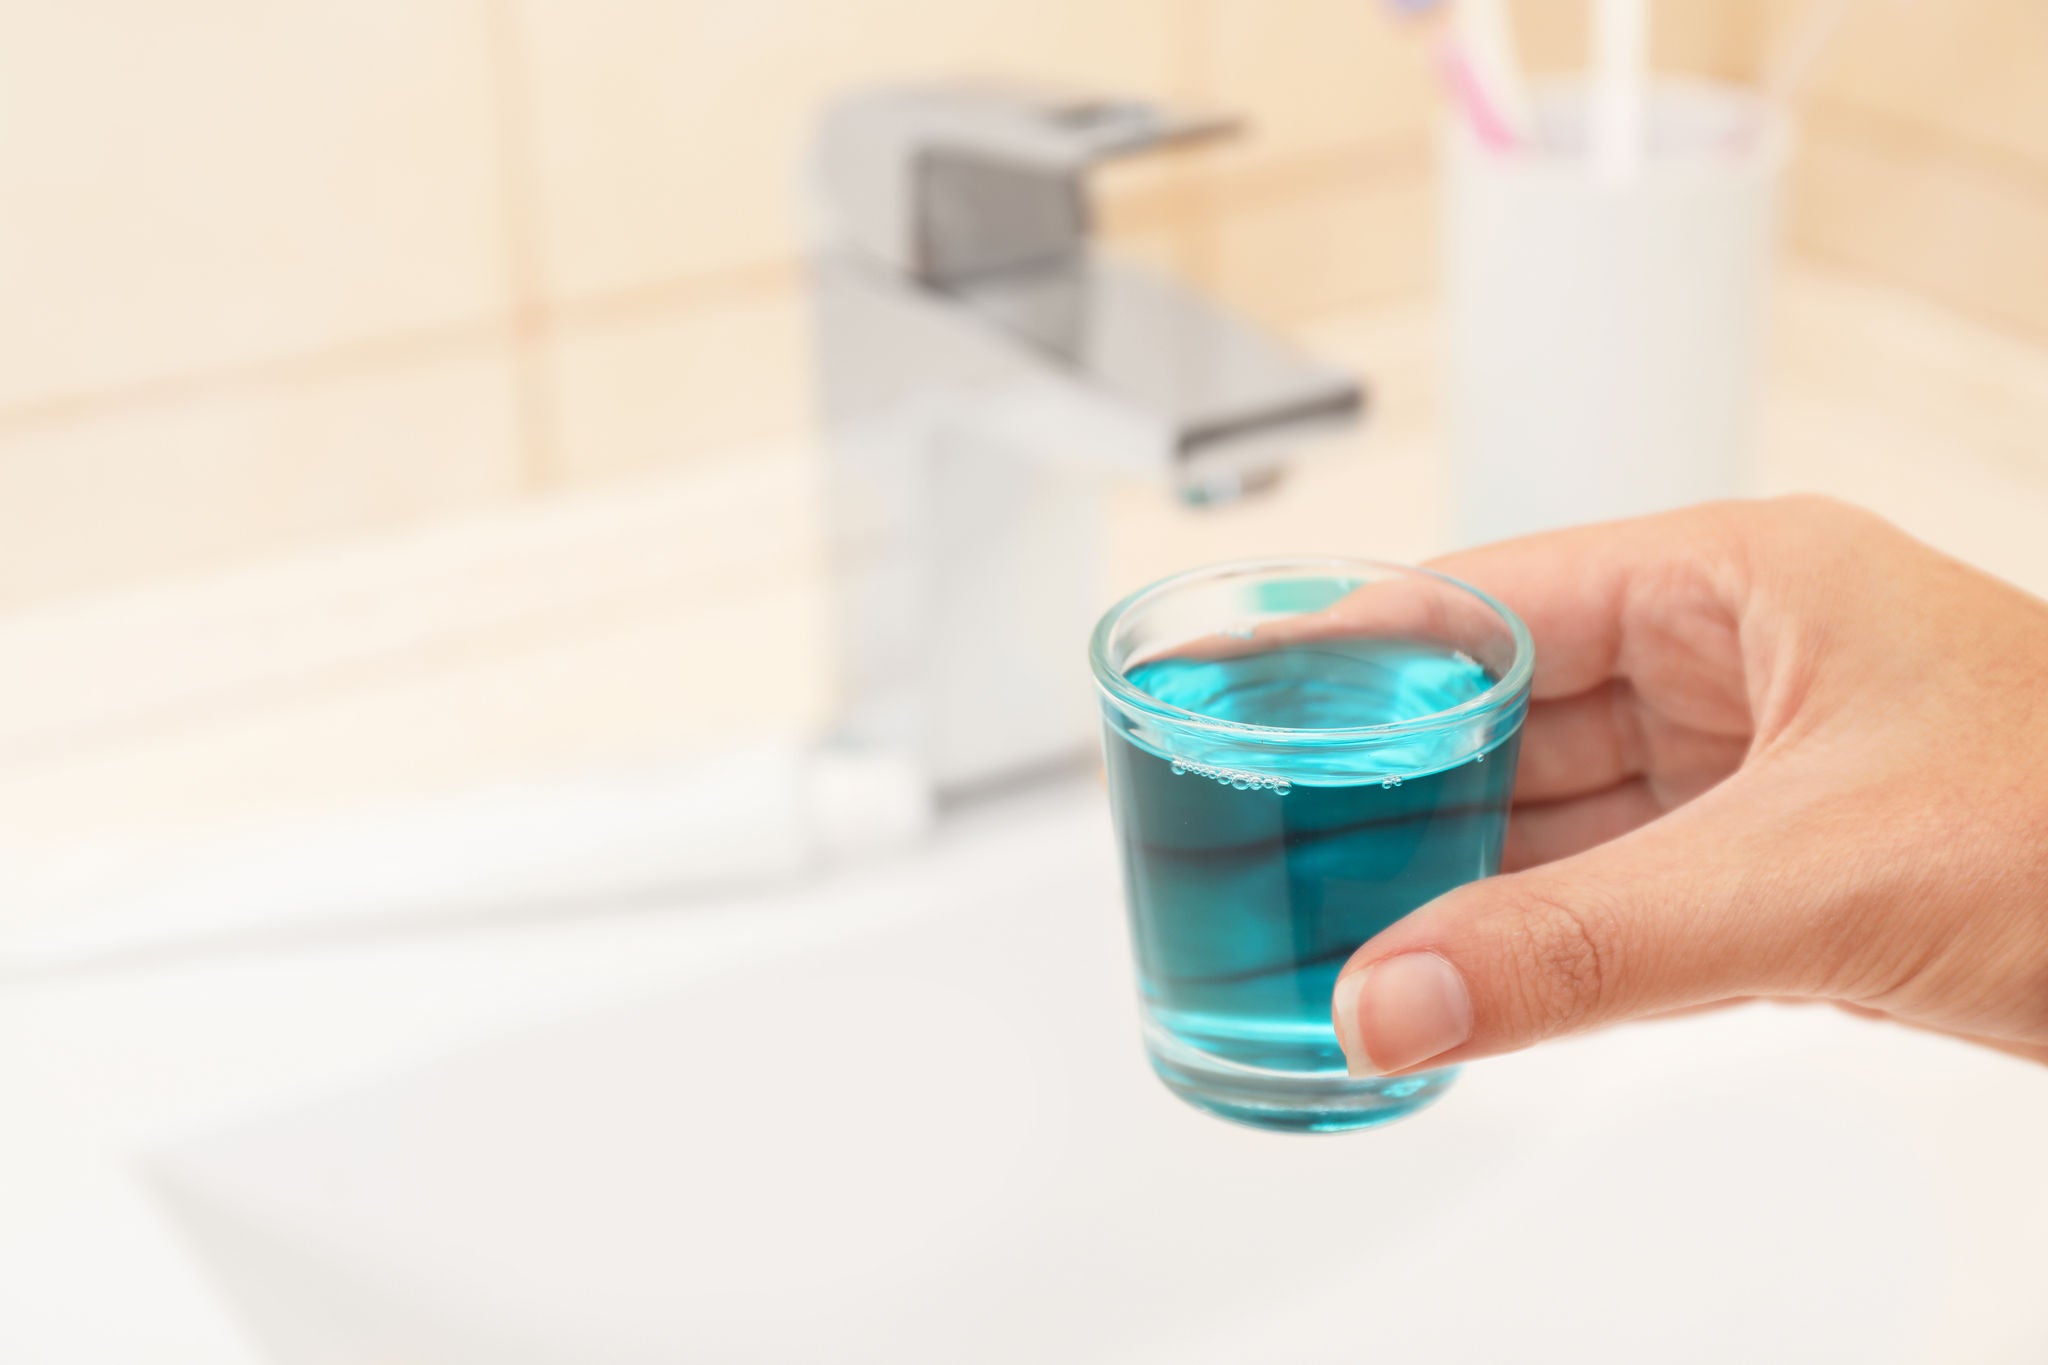 Woman holding glass with mouthwash for teeth and oral care in bathroom